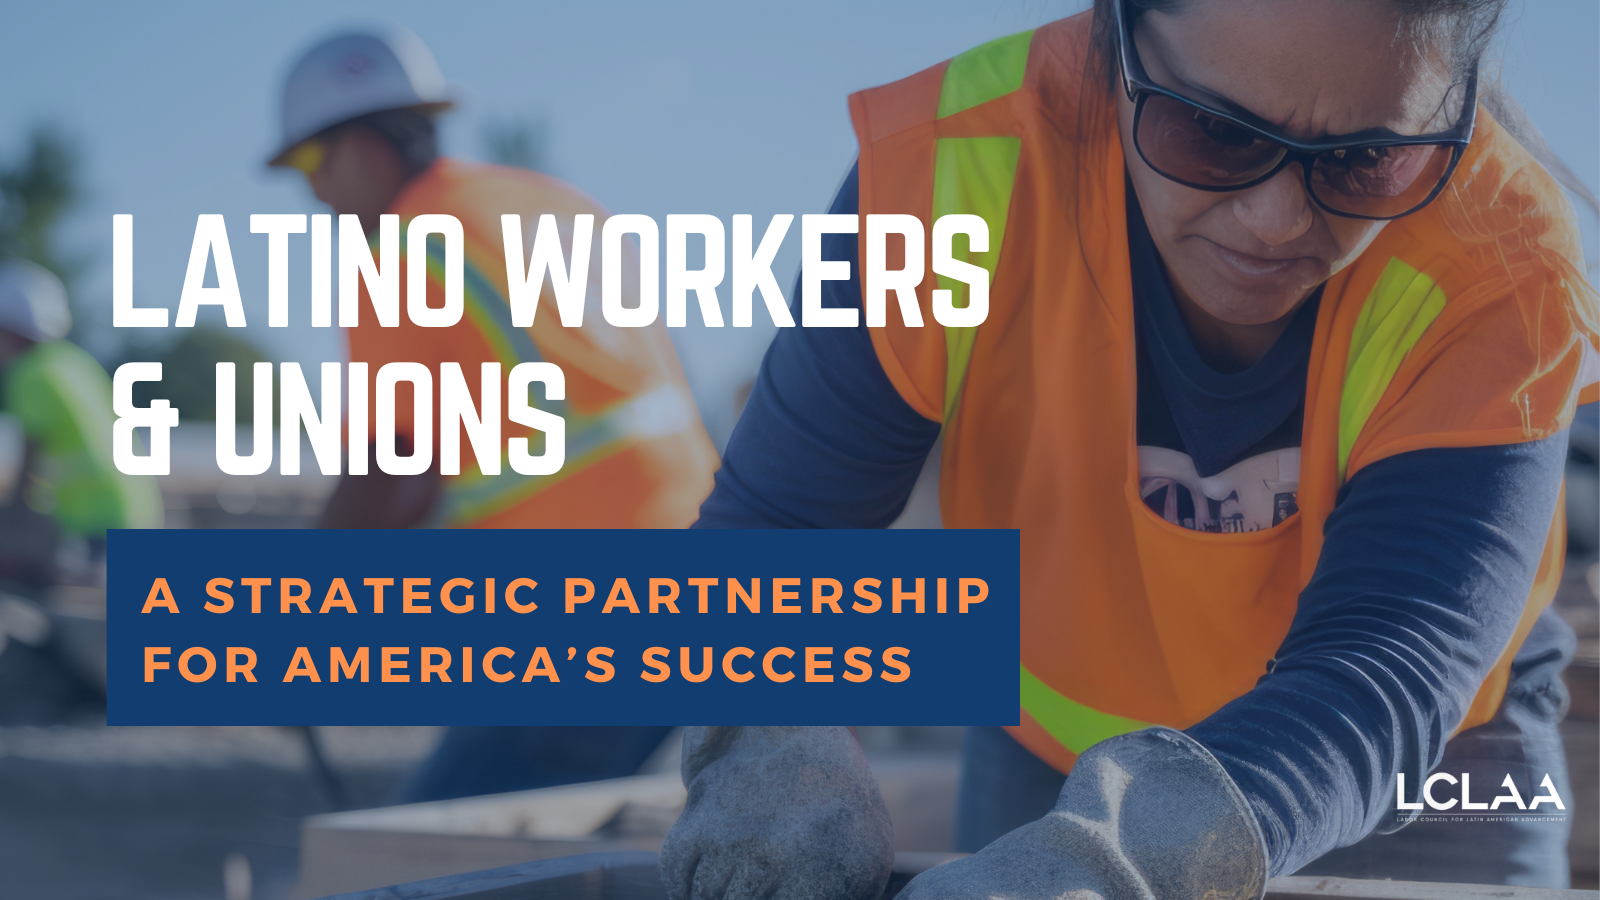 New LCLAA Report Examines How Latino Workers, Labor Movement Can Further Unite